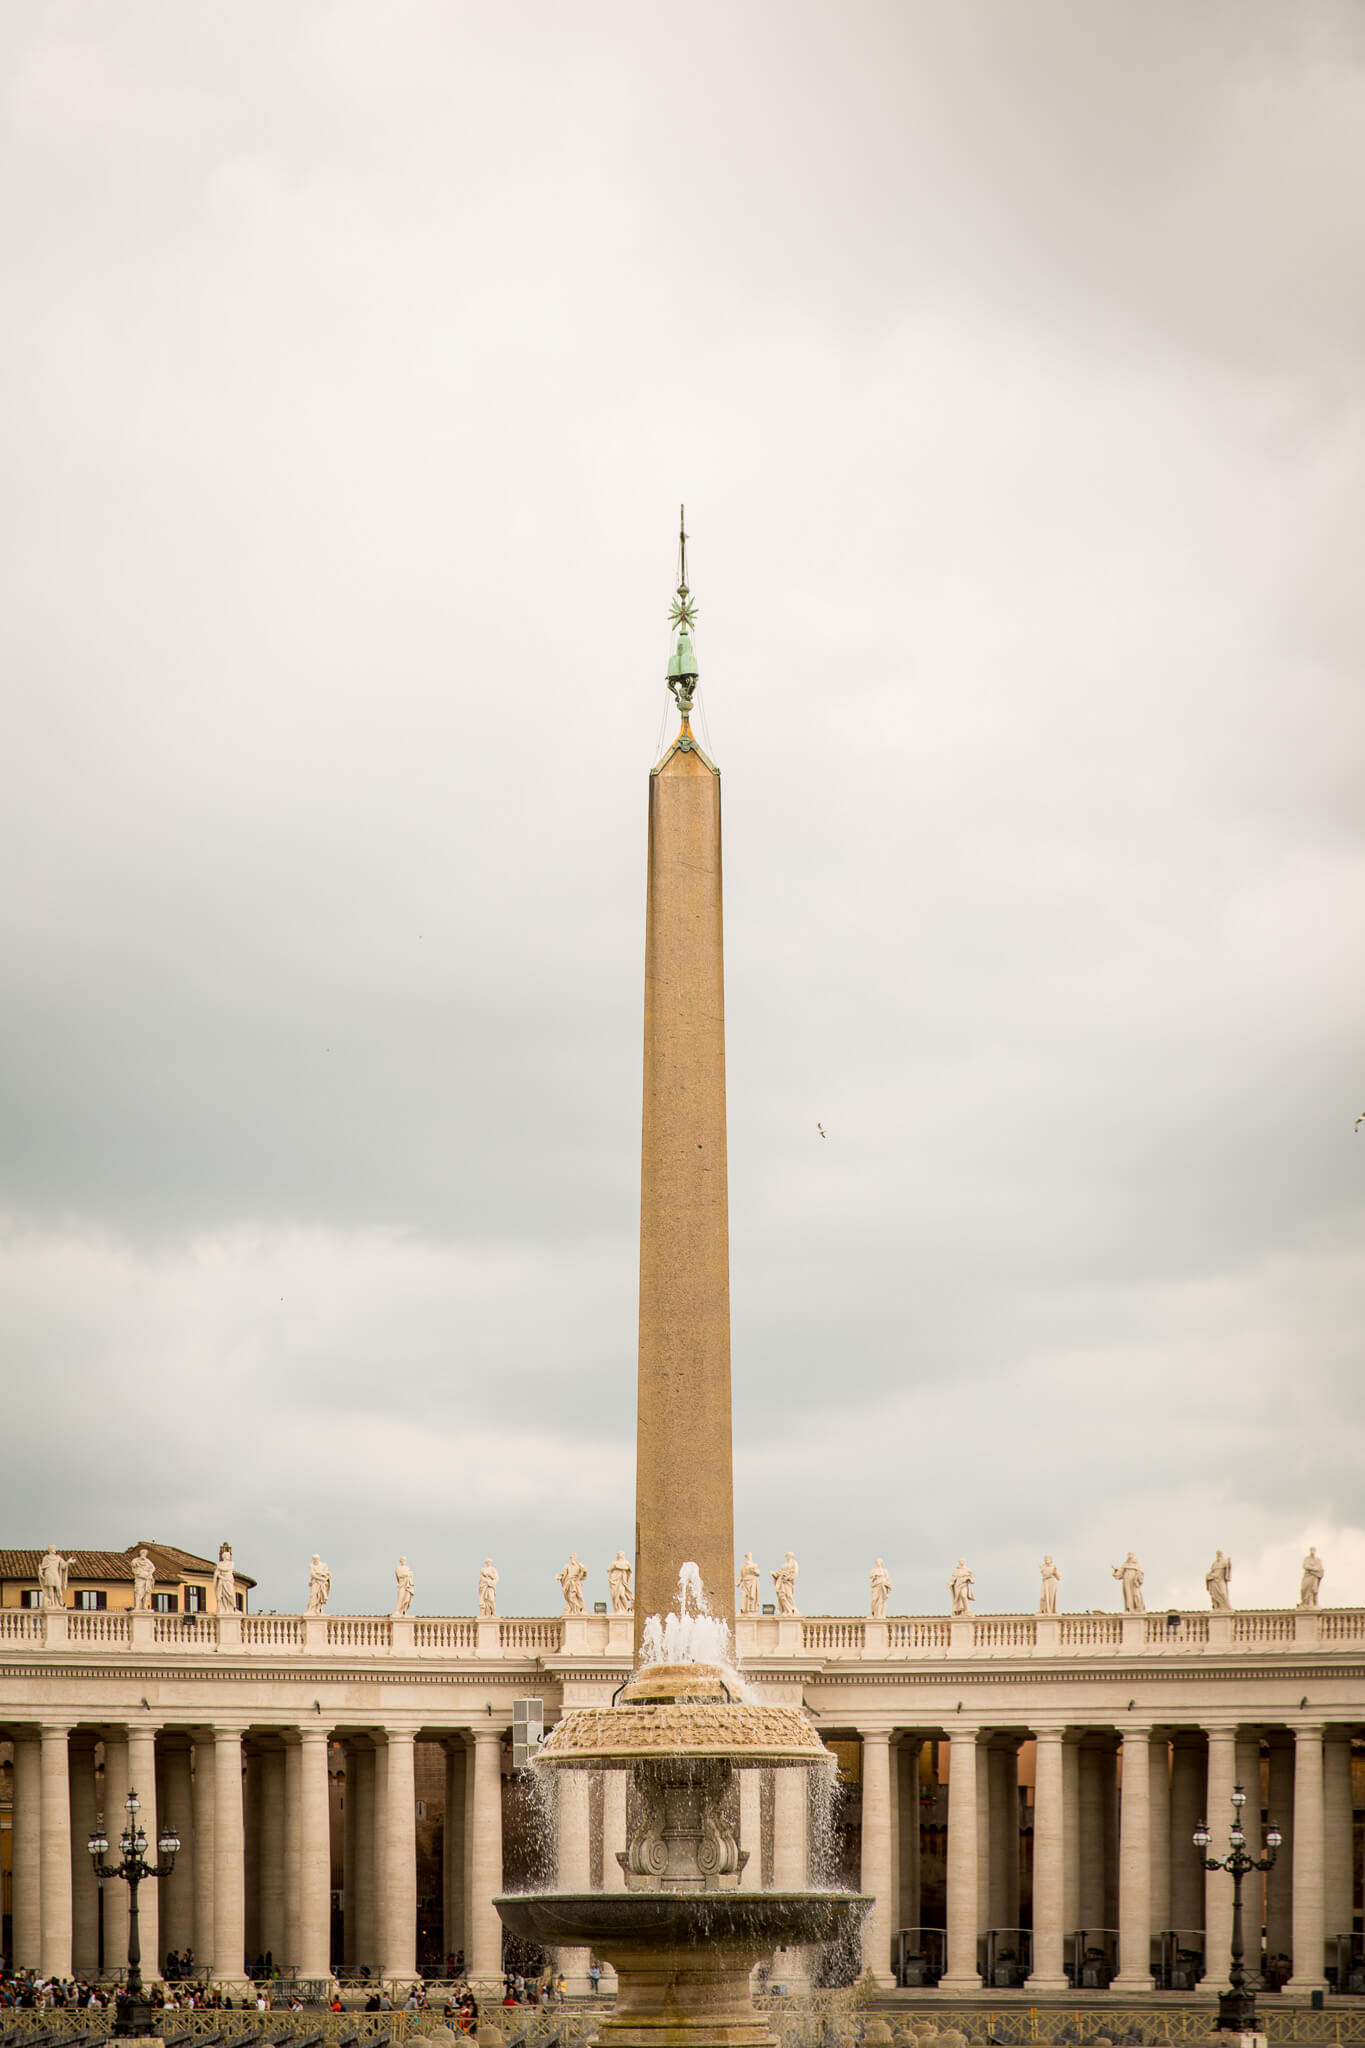 The Vatican Obelisk in front of the colonnade of Saint Peter's Square